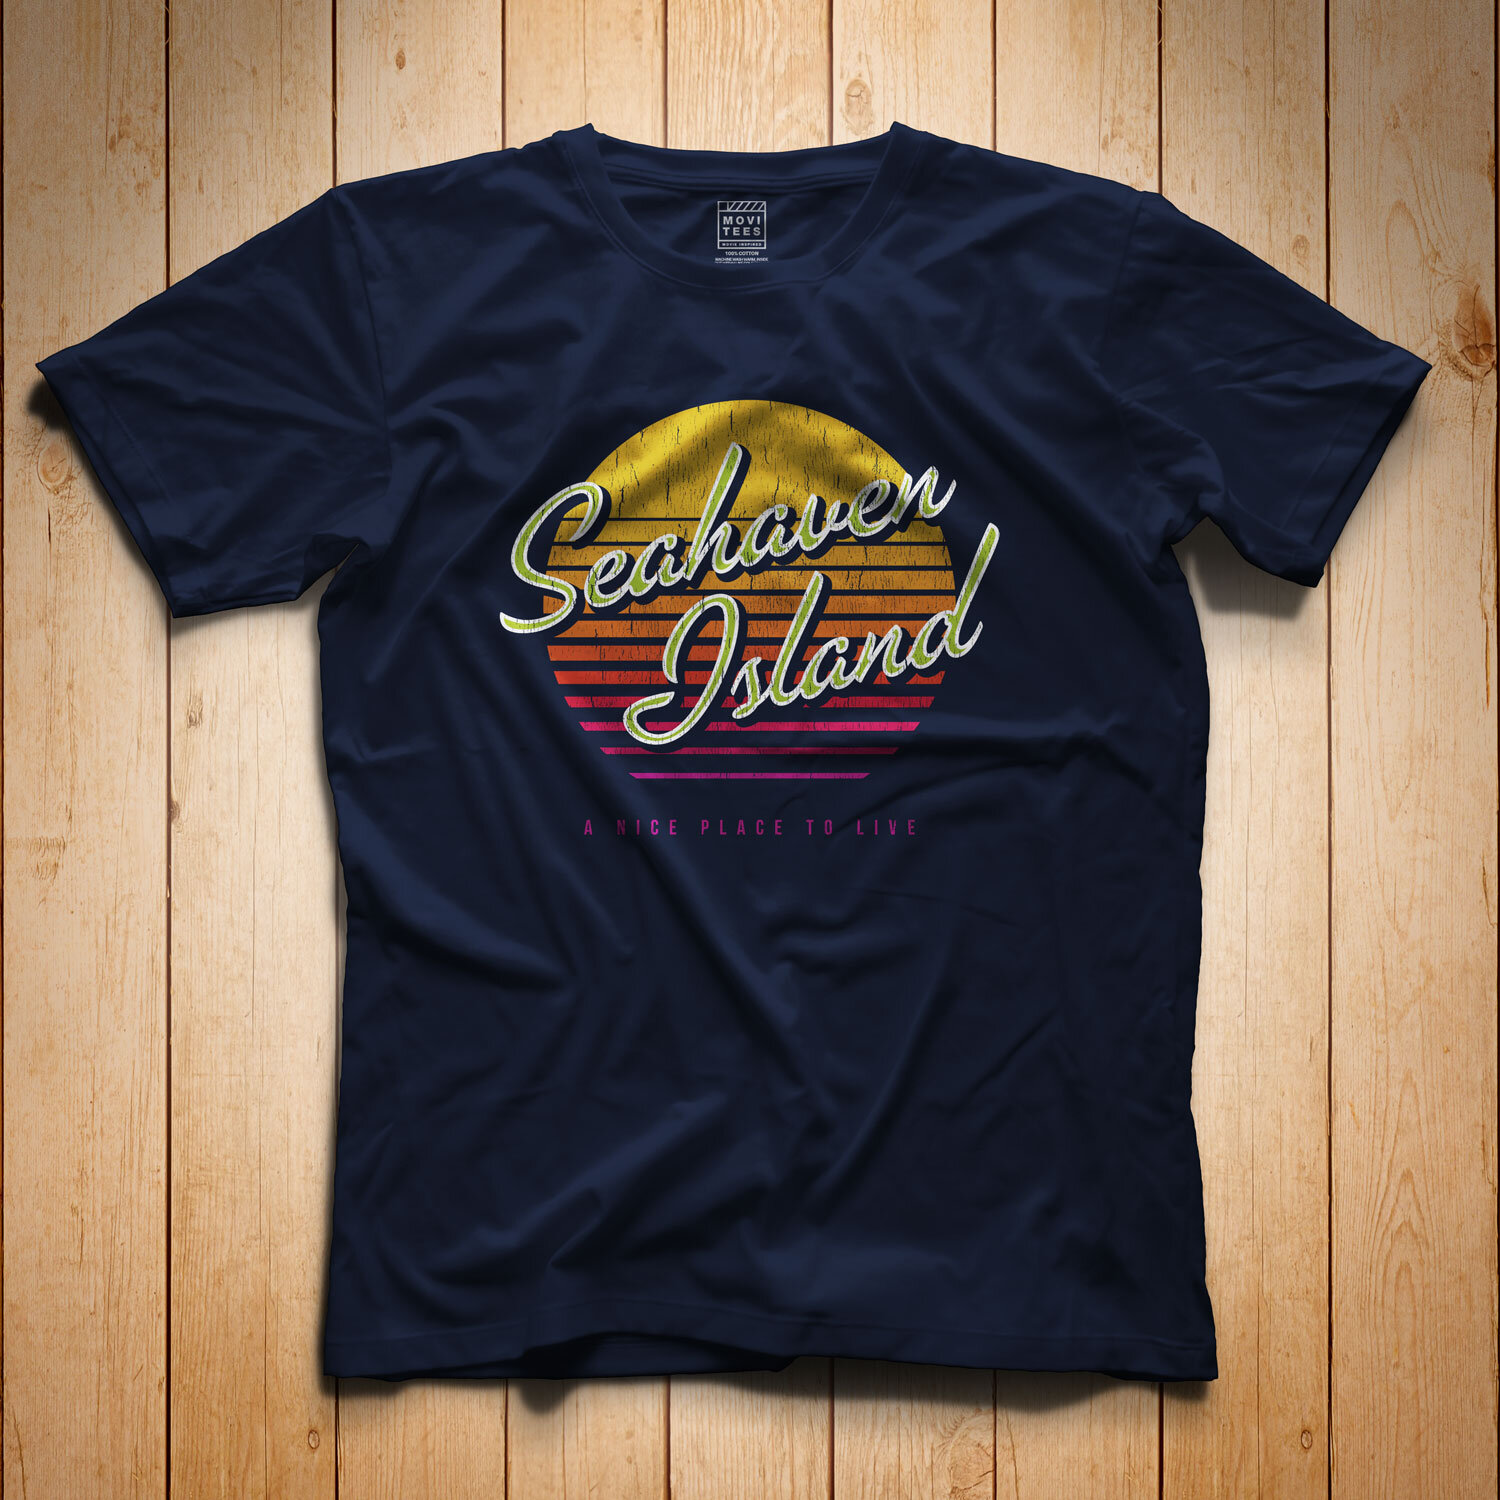 Seahaven Island T-Shirt inspired by The Truman Show - Regular T-Shirt —  MoviTees